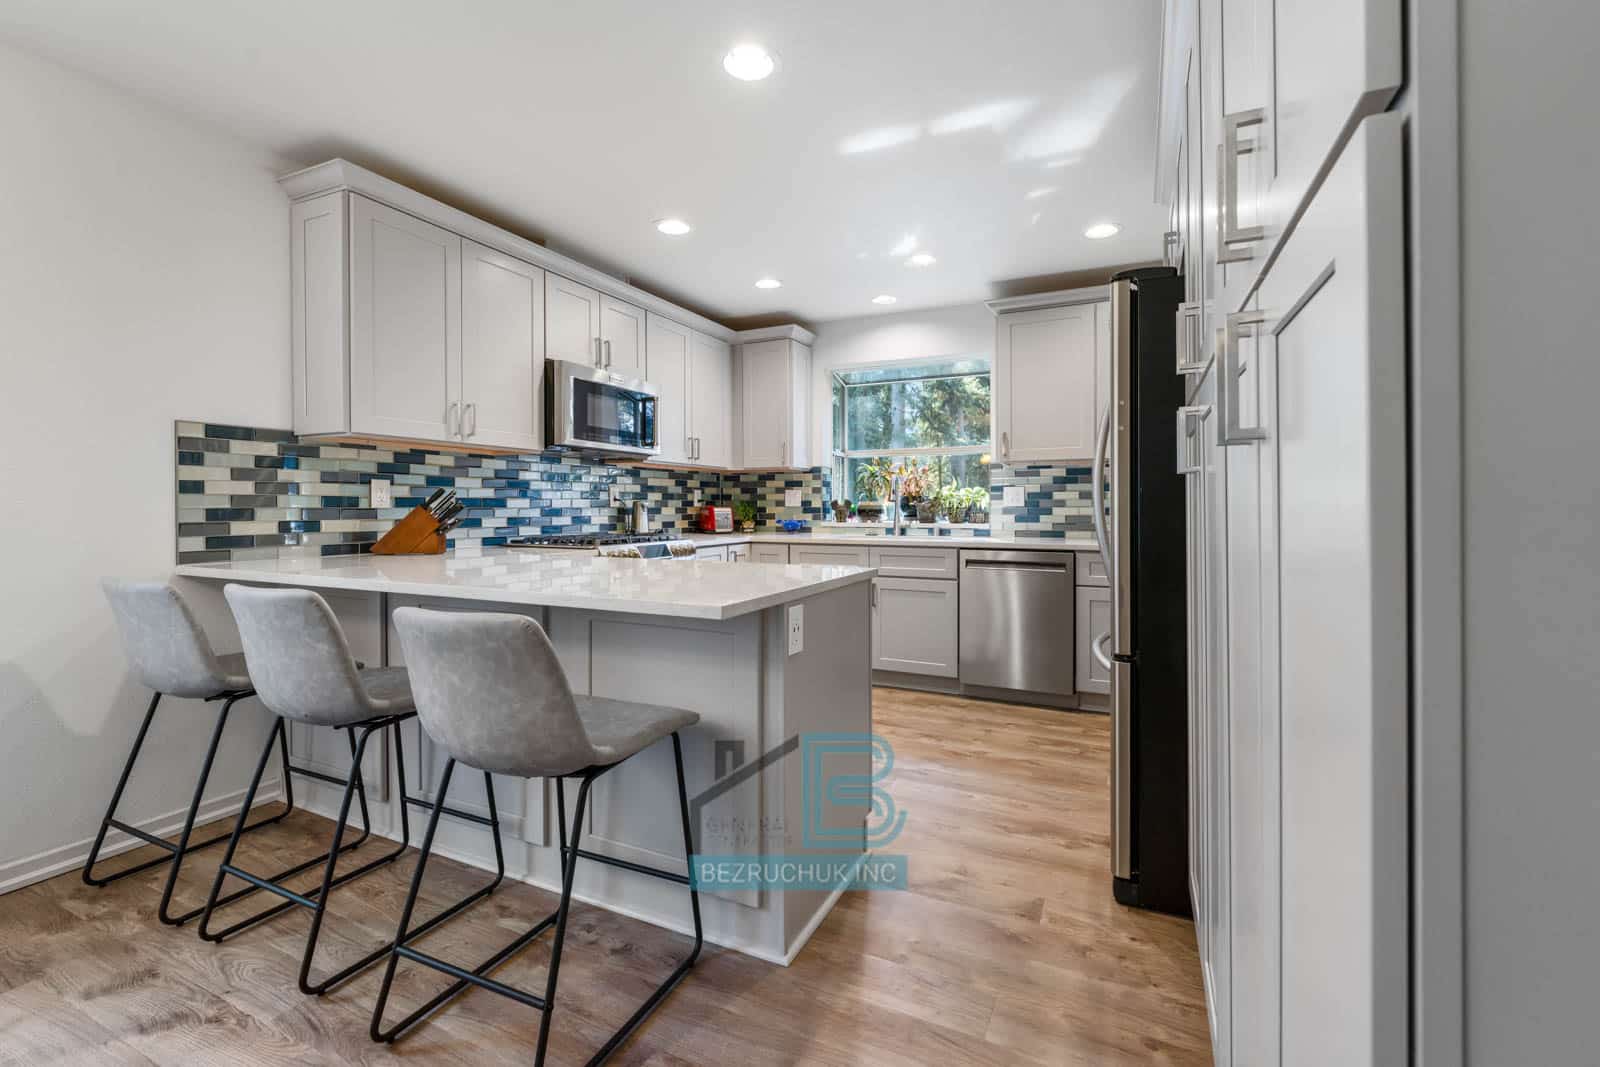 beautiful peninsula with extra seating in the kitchen